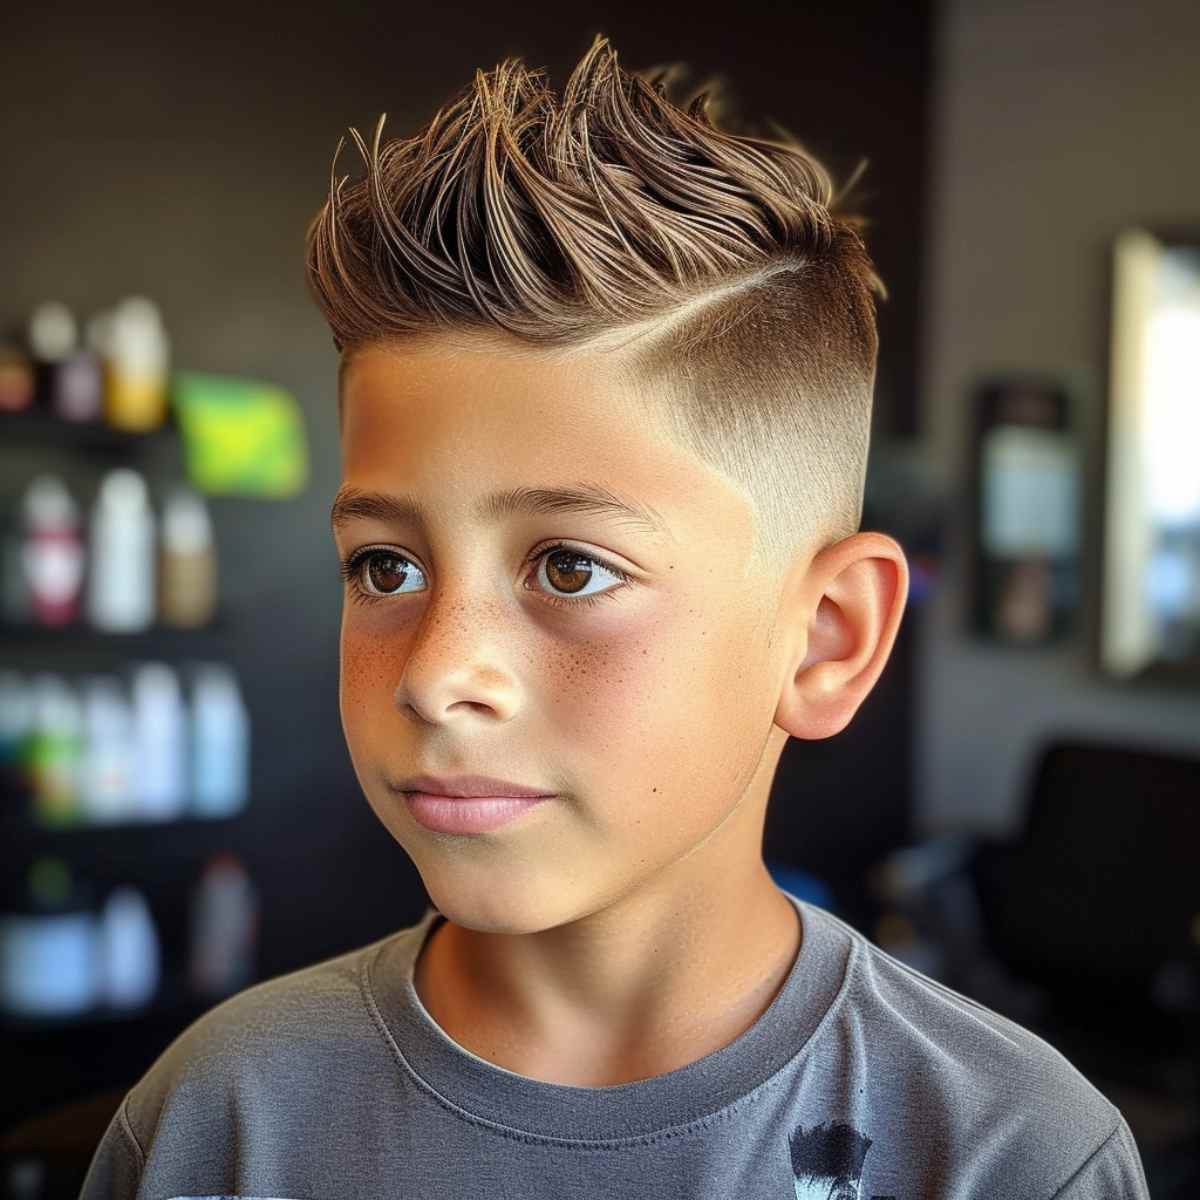 A tapered haircut with a hard part haircut